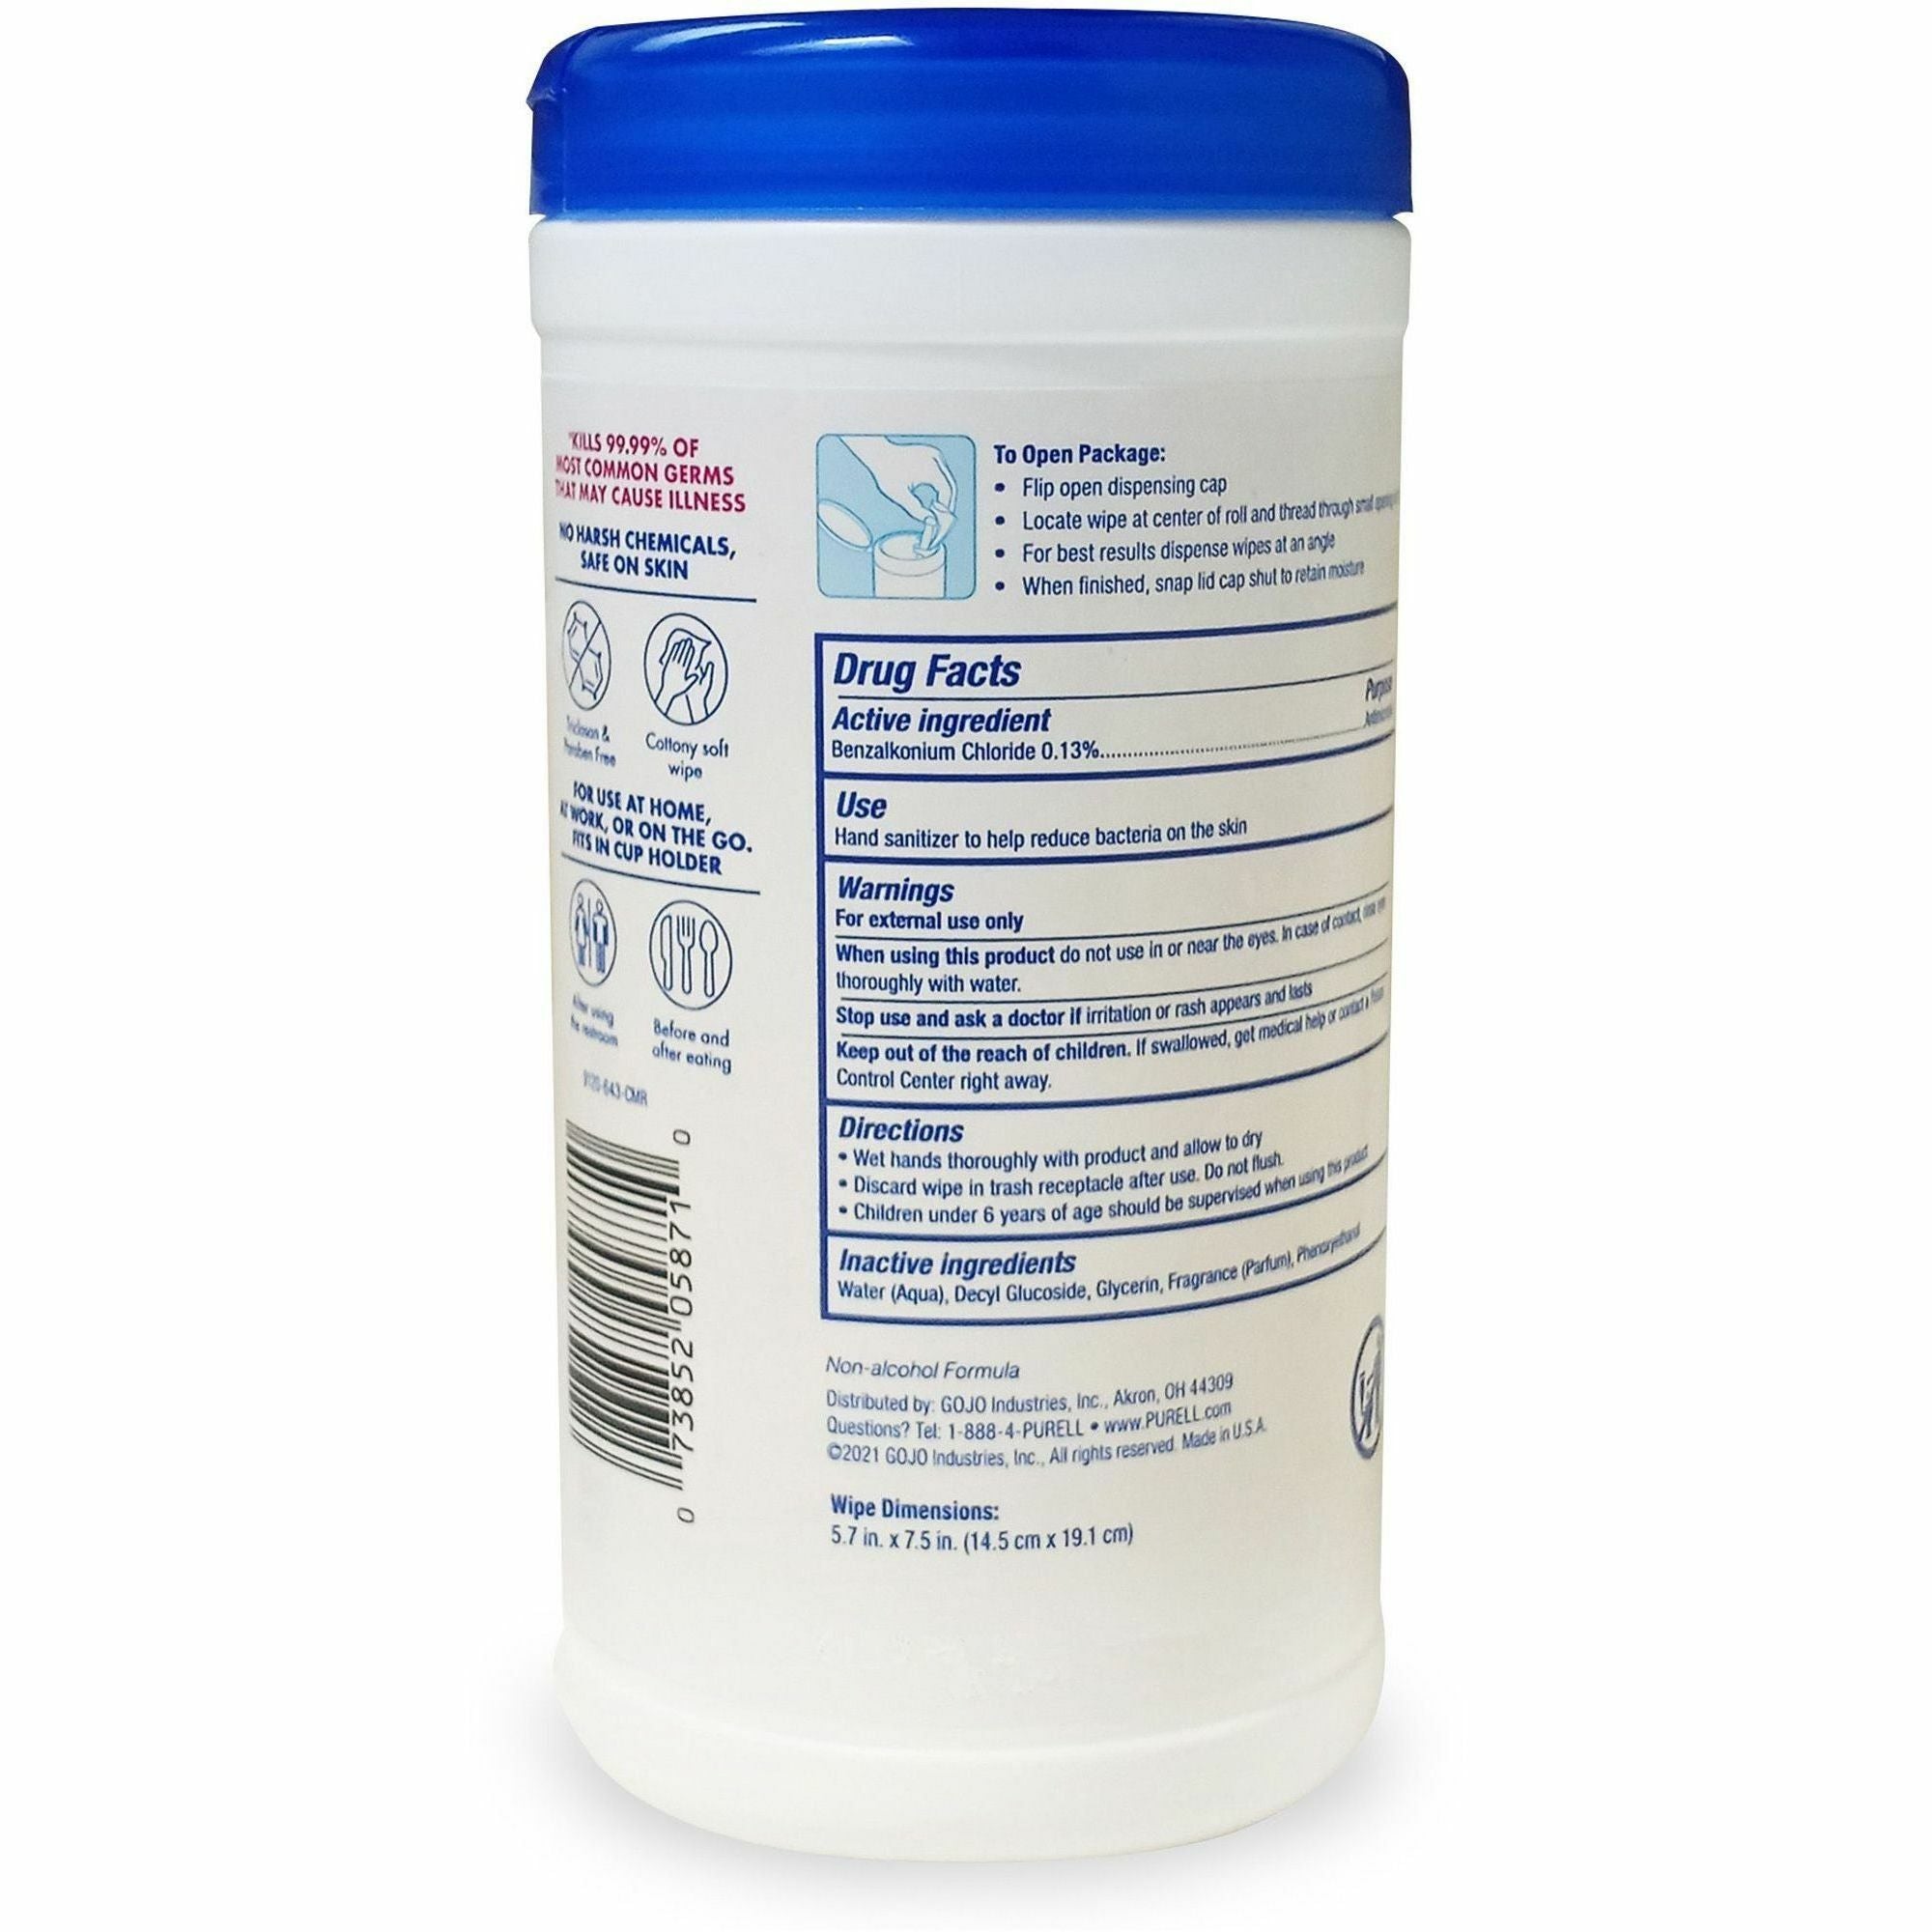 purell-clean-scent-hand-sanitizing-wipes-clean-white-durable-alcohol-free-for-hand-multi-surface-face-40-per-canister-1-each_goj912006cmr - 2